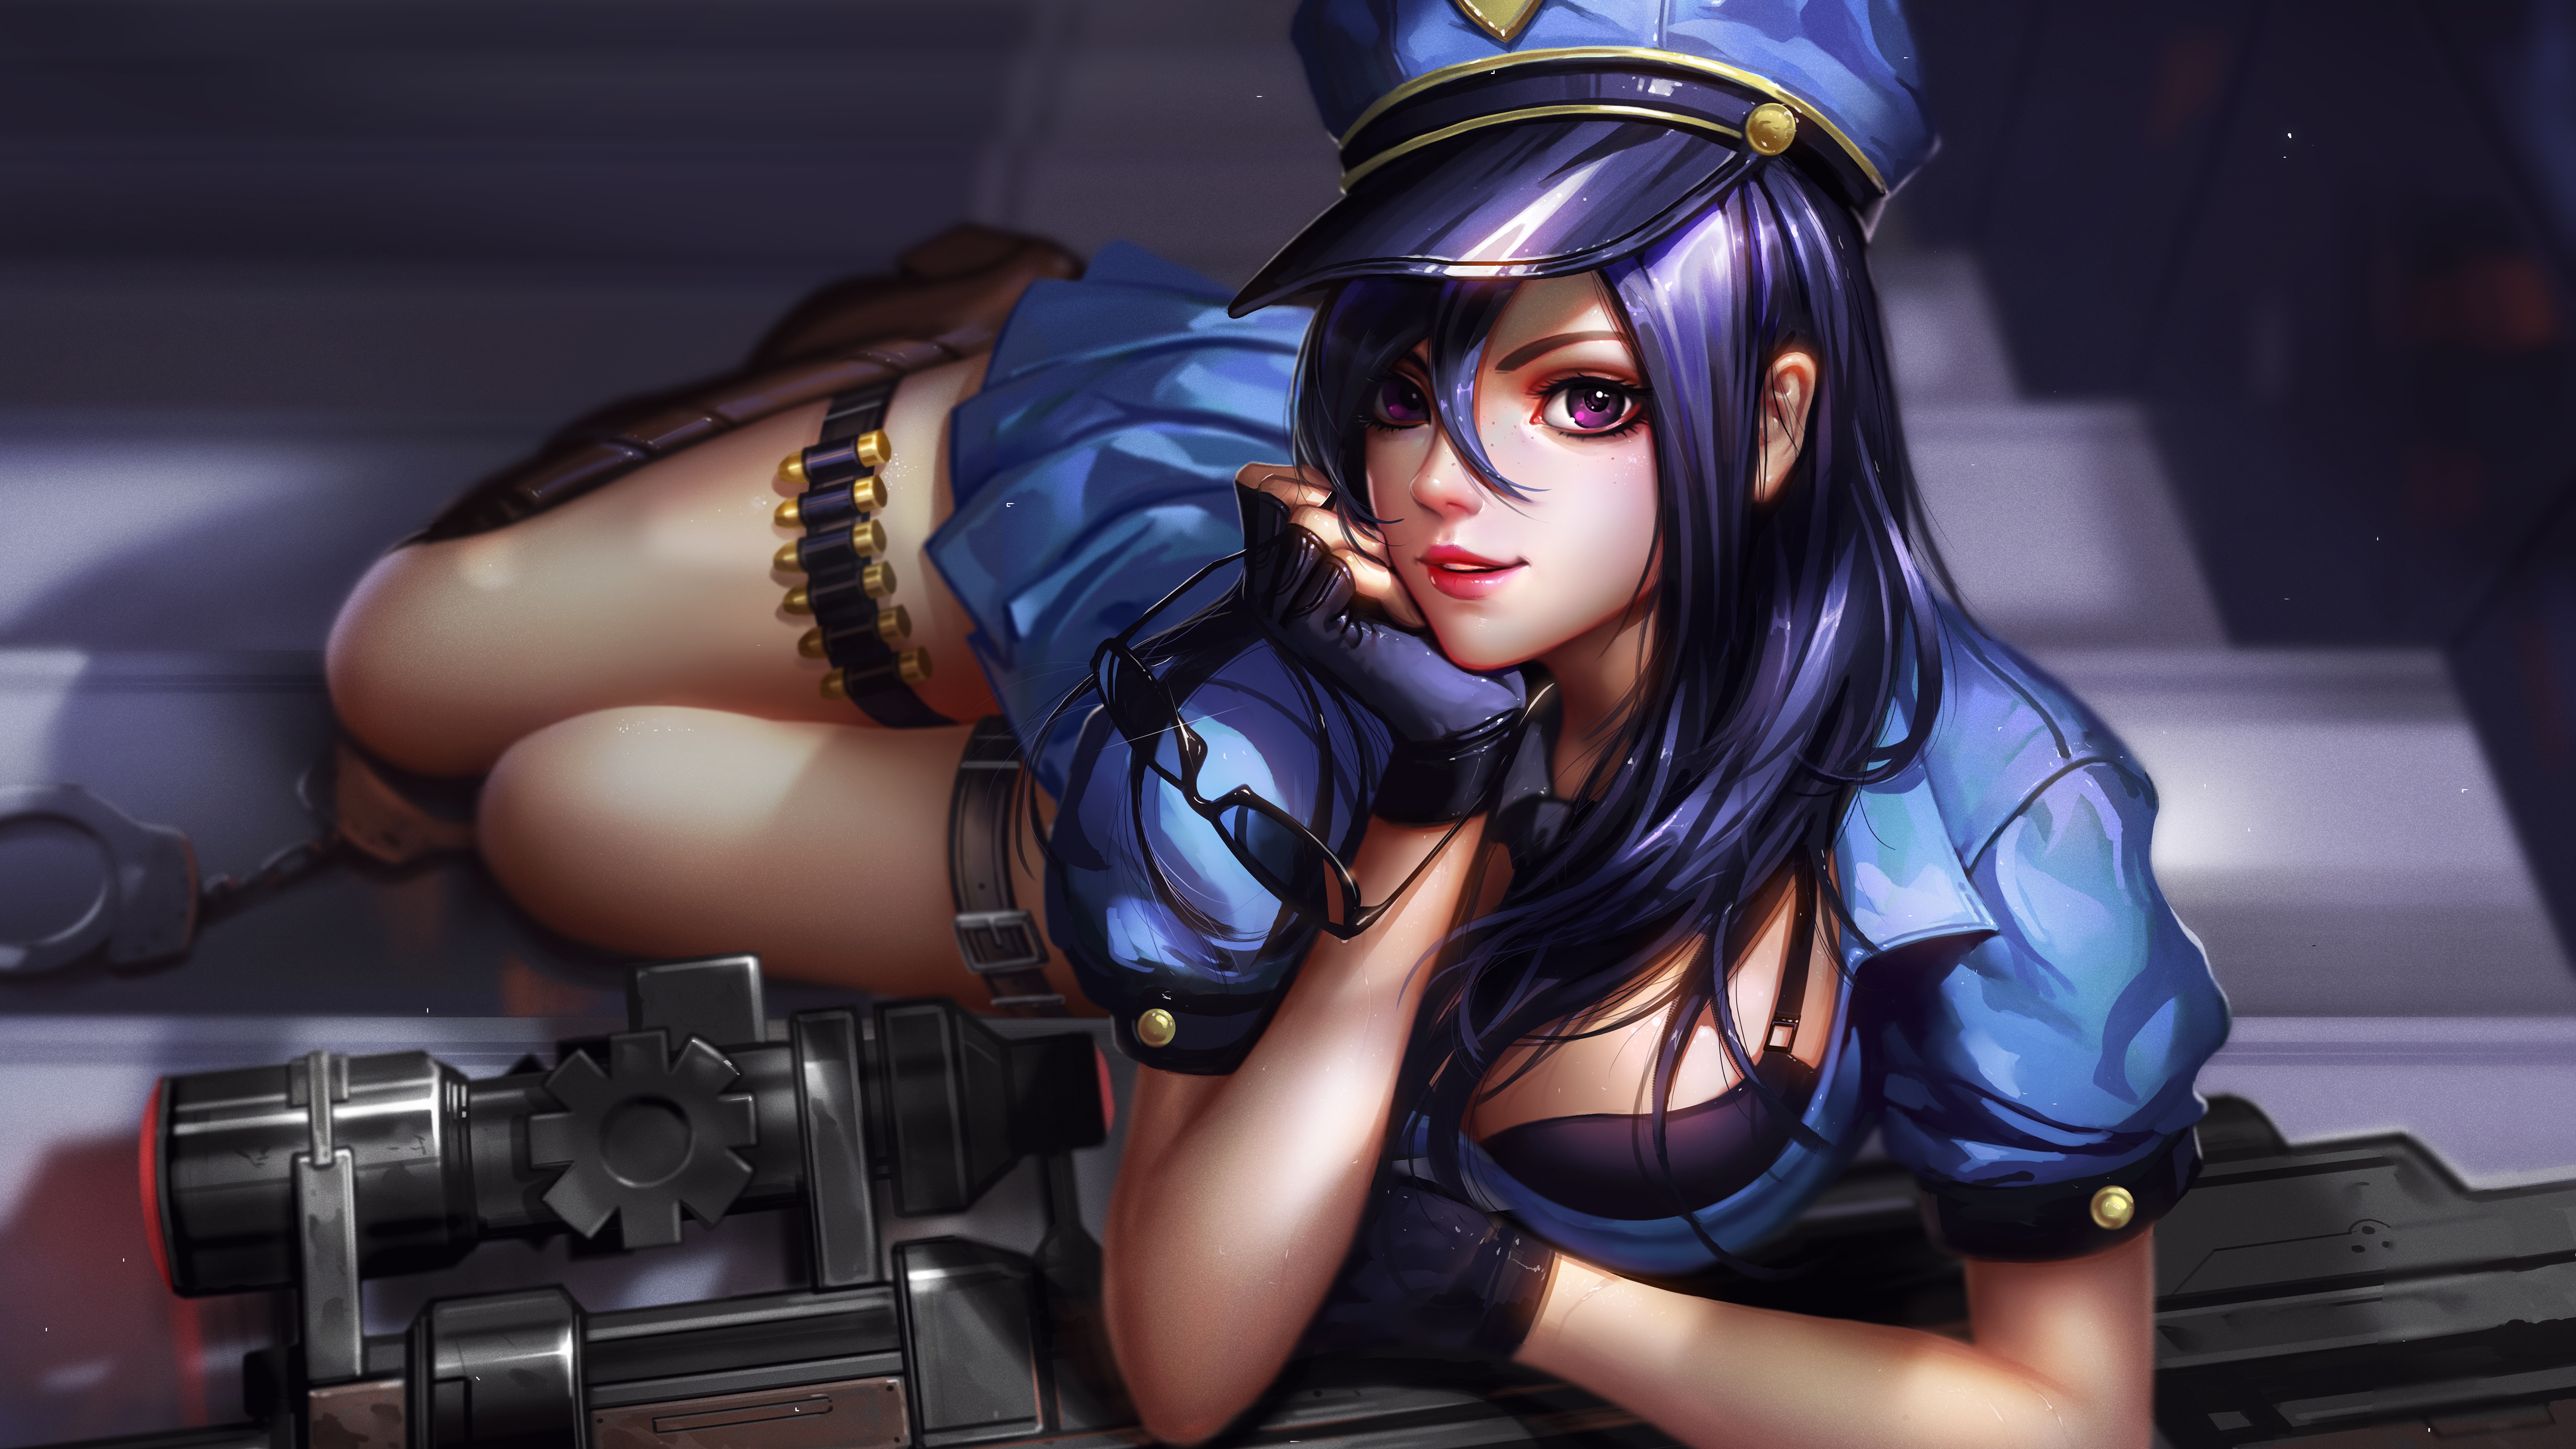 General 7680x4320 League of Legends Caitlyn (League of Legends) looking at viewer sheriff girls with guns Jason Liang video game characters gun video game girls smiling Riot Games video games gloves fingerless gloves hair between eyes long hair hat women with hats police costume police police hat purple eyes lying down lying on front thighs together leg ring ammunition short sleeves